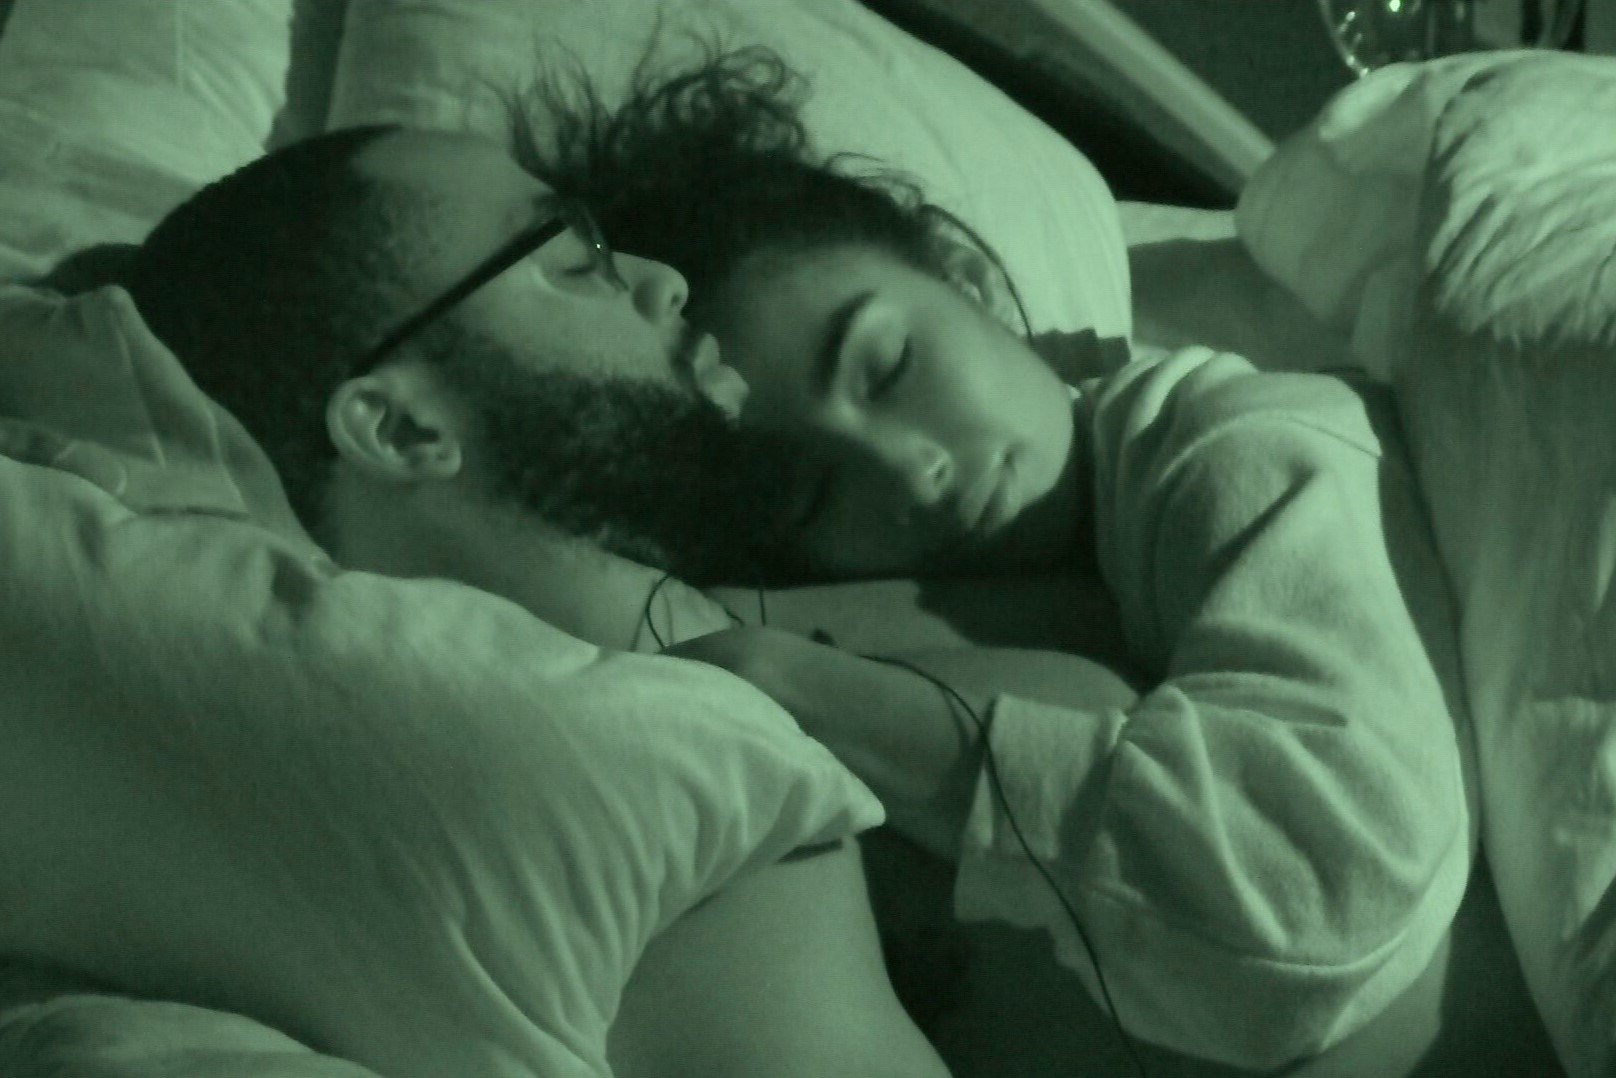 Monte Taylor and Taylor Hale, who are in a showmance in 'Big Brother 24' on CBS, sleep in bed together.